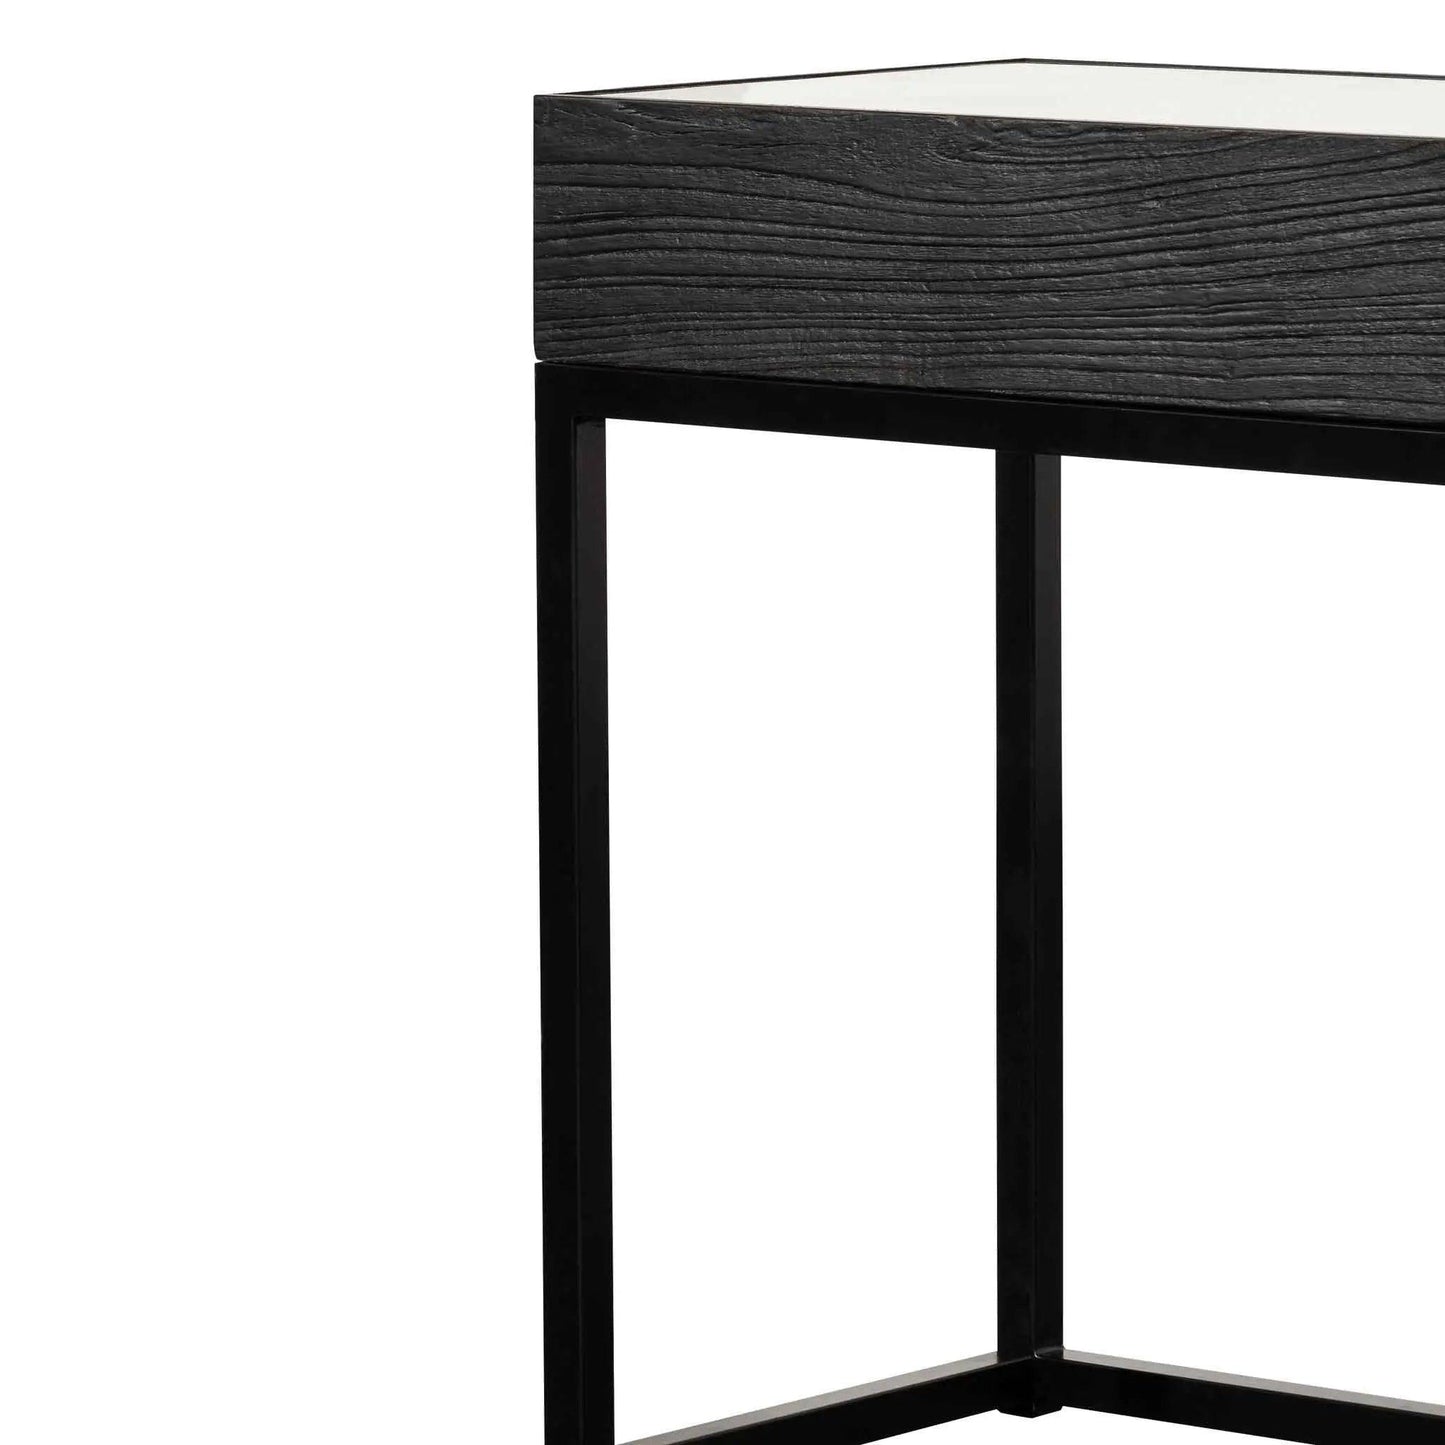 Calibre 1.39m Reclaimed Console Table - Full Black DT6307-NI - Console TablesDT6307-NI 3